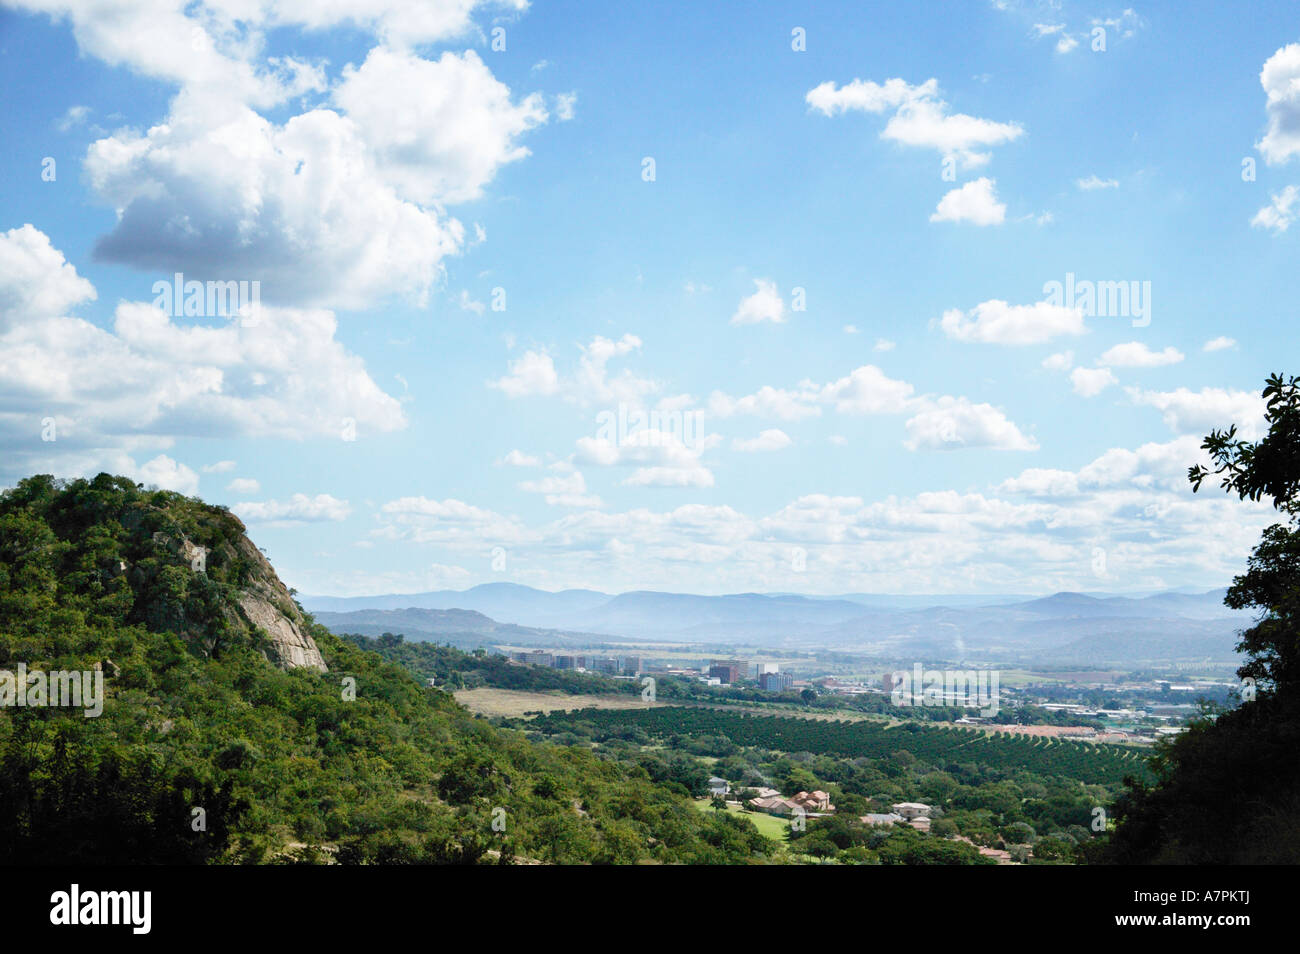 Distant view of Nelspruit city center and surrounding landscape Nelspruit Mpumalanga South Africa Stock Photo